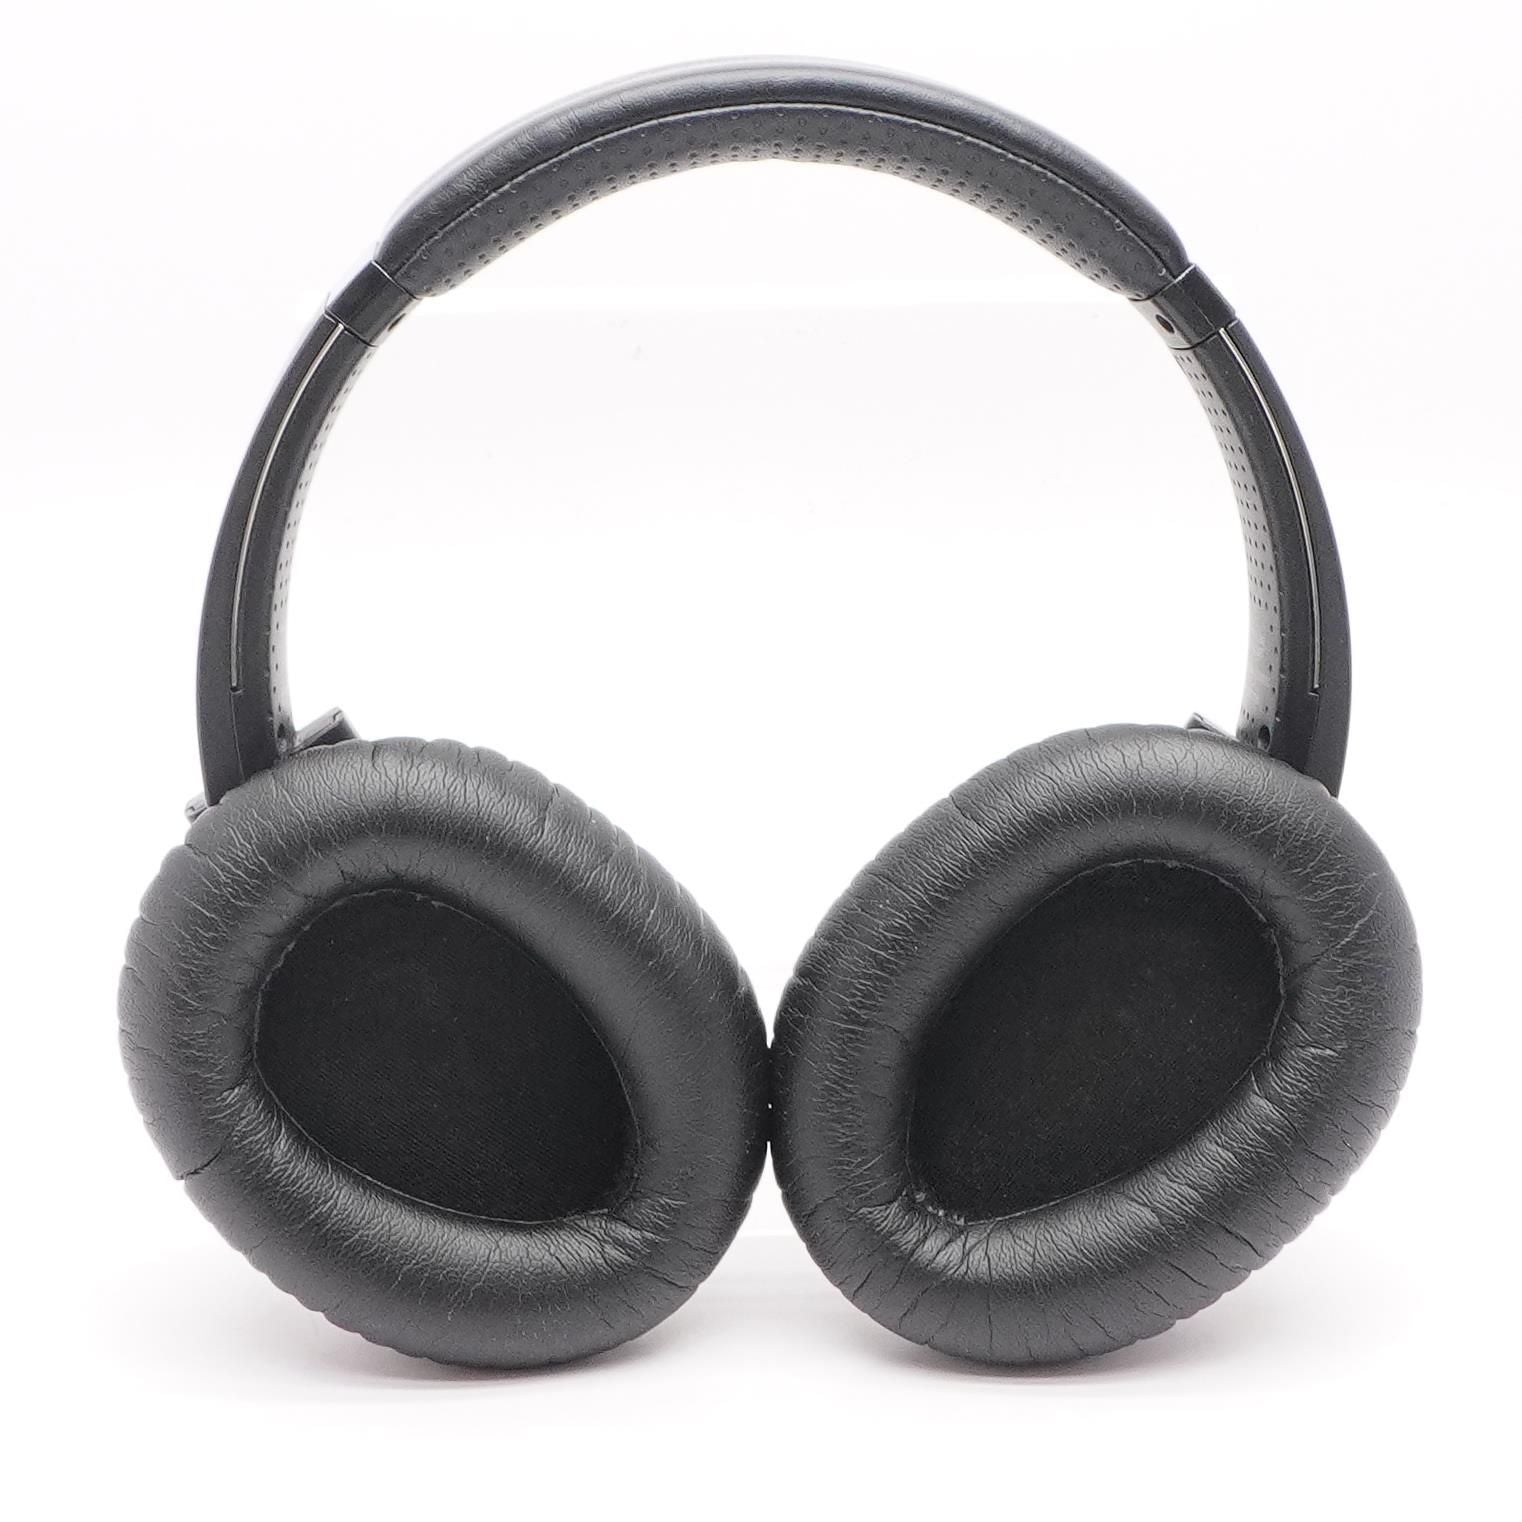 Black MDR-ZX780DC Bluetooth Noise Cancelling Headphones